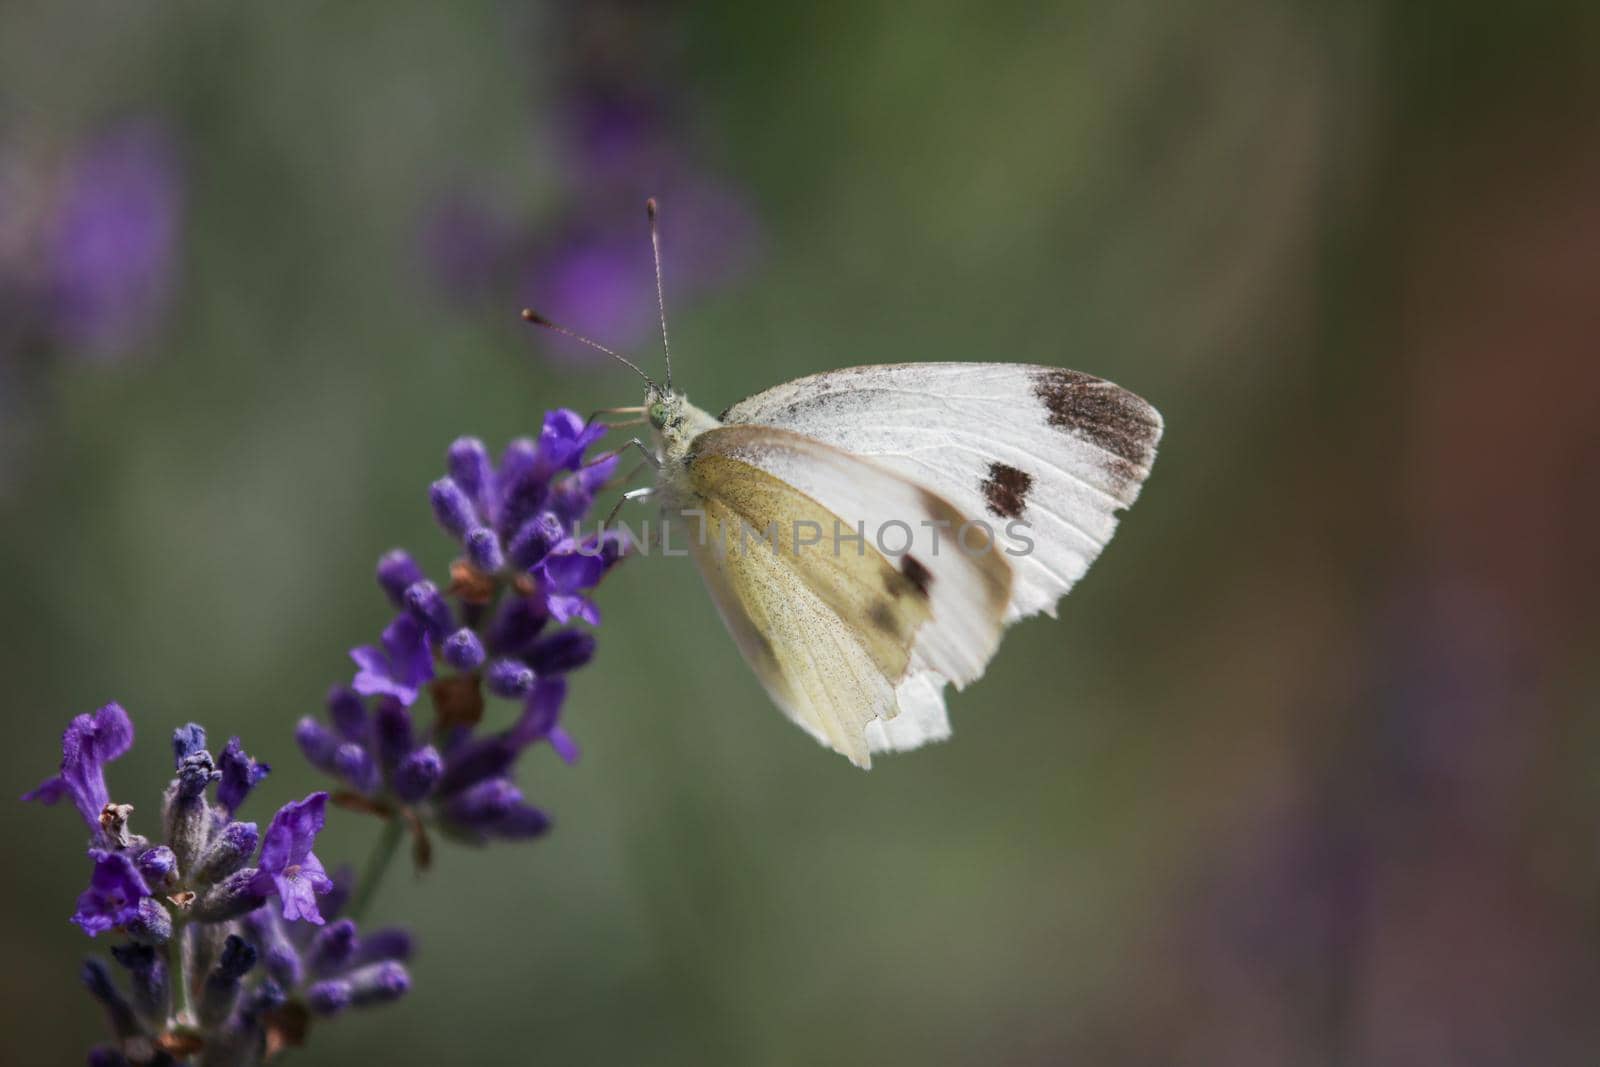 Cabbage White Butterfly, Pieris rapae sitting on purple lavender blossom